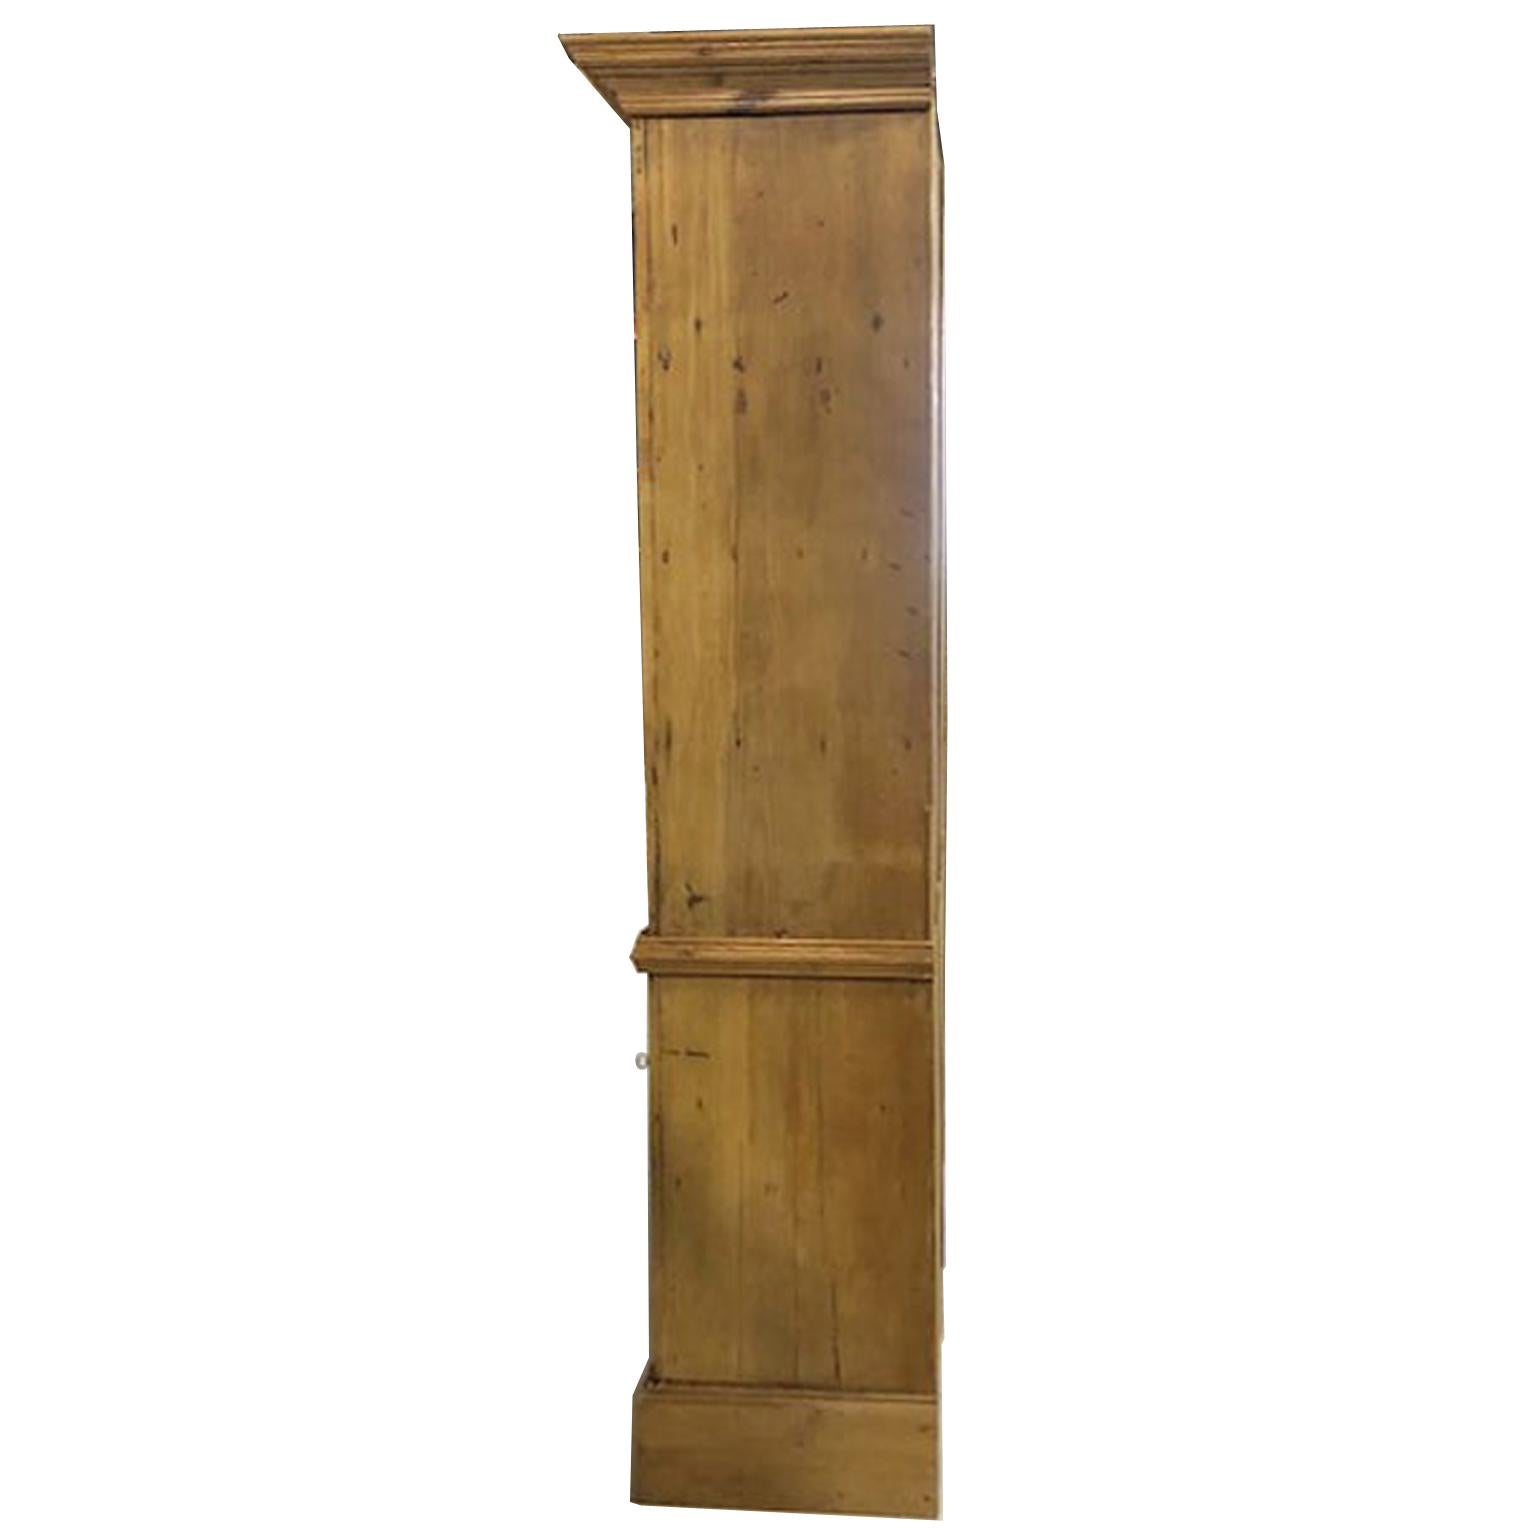 Large Georgian Style English Pine Bookcase/Display Cabinet, c. 1890 and later 8